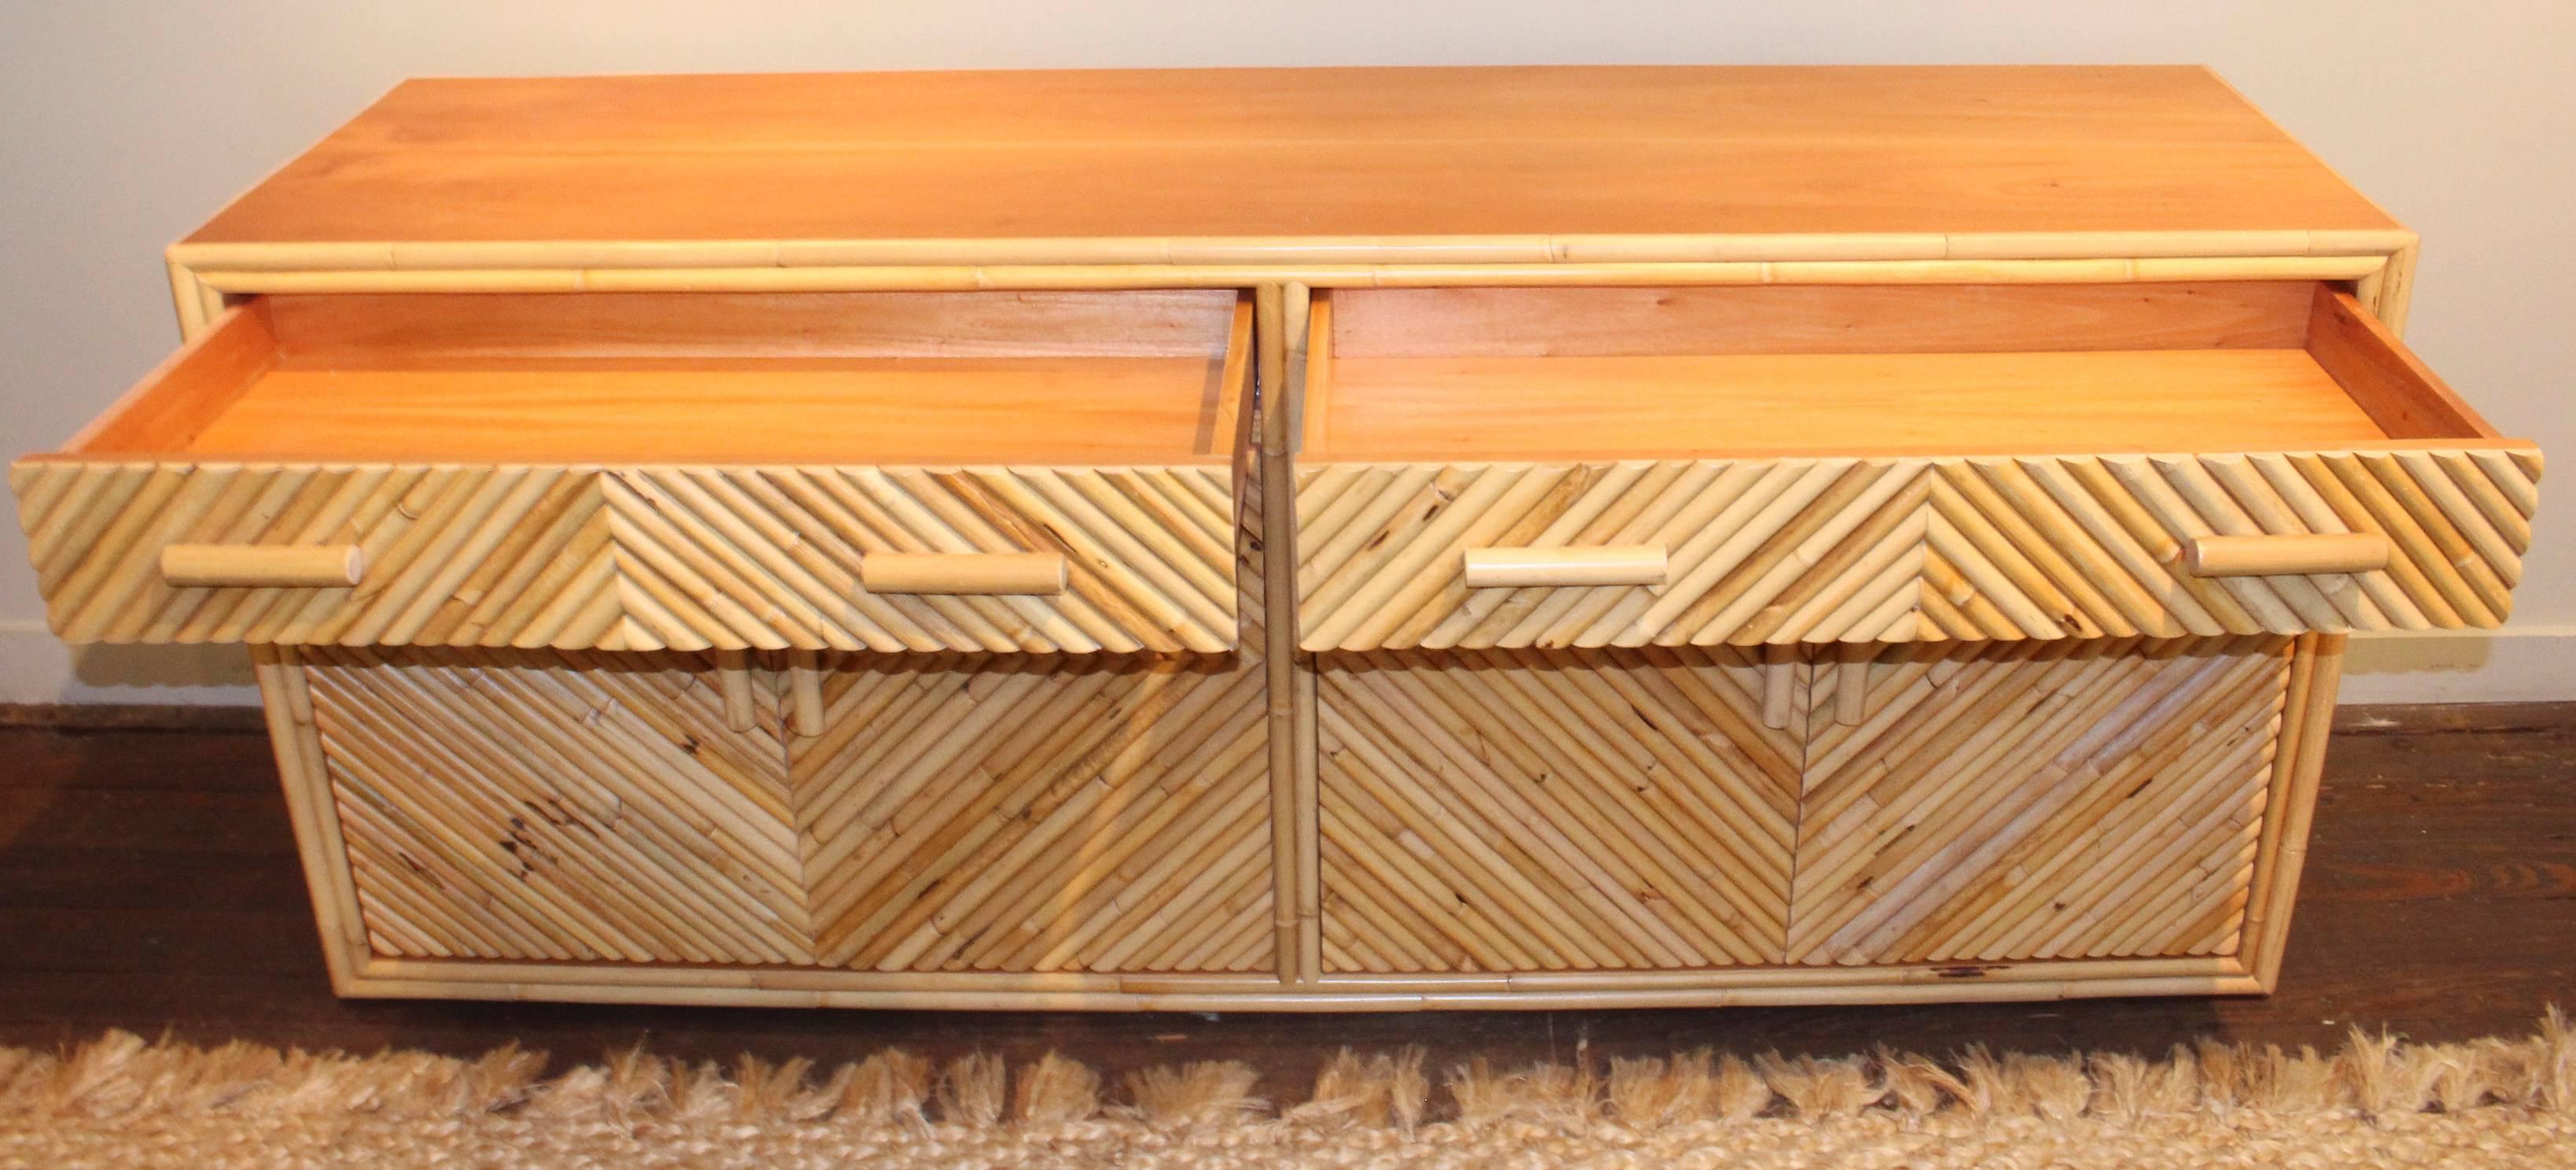 Split Bamboo Sideboard Cabinet, 20th Century For Sale 2